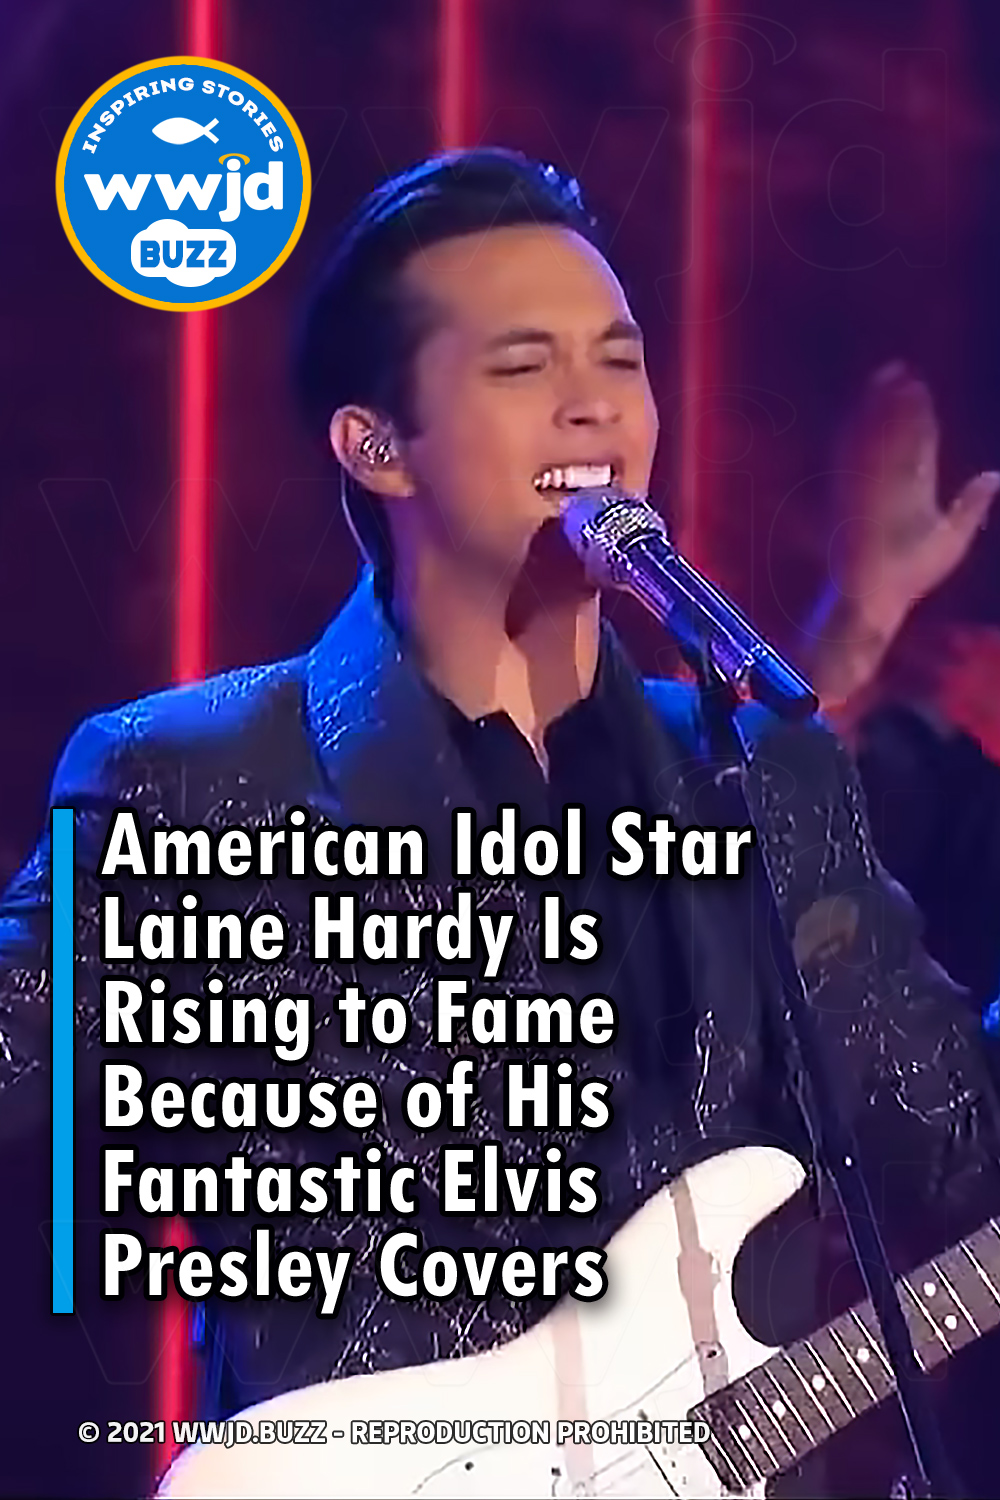 American Idol Star Laine Hardy Is Rising to Fame Because of His Fantastic Elvis Presley Covers